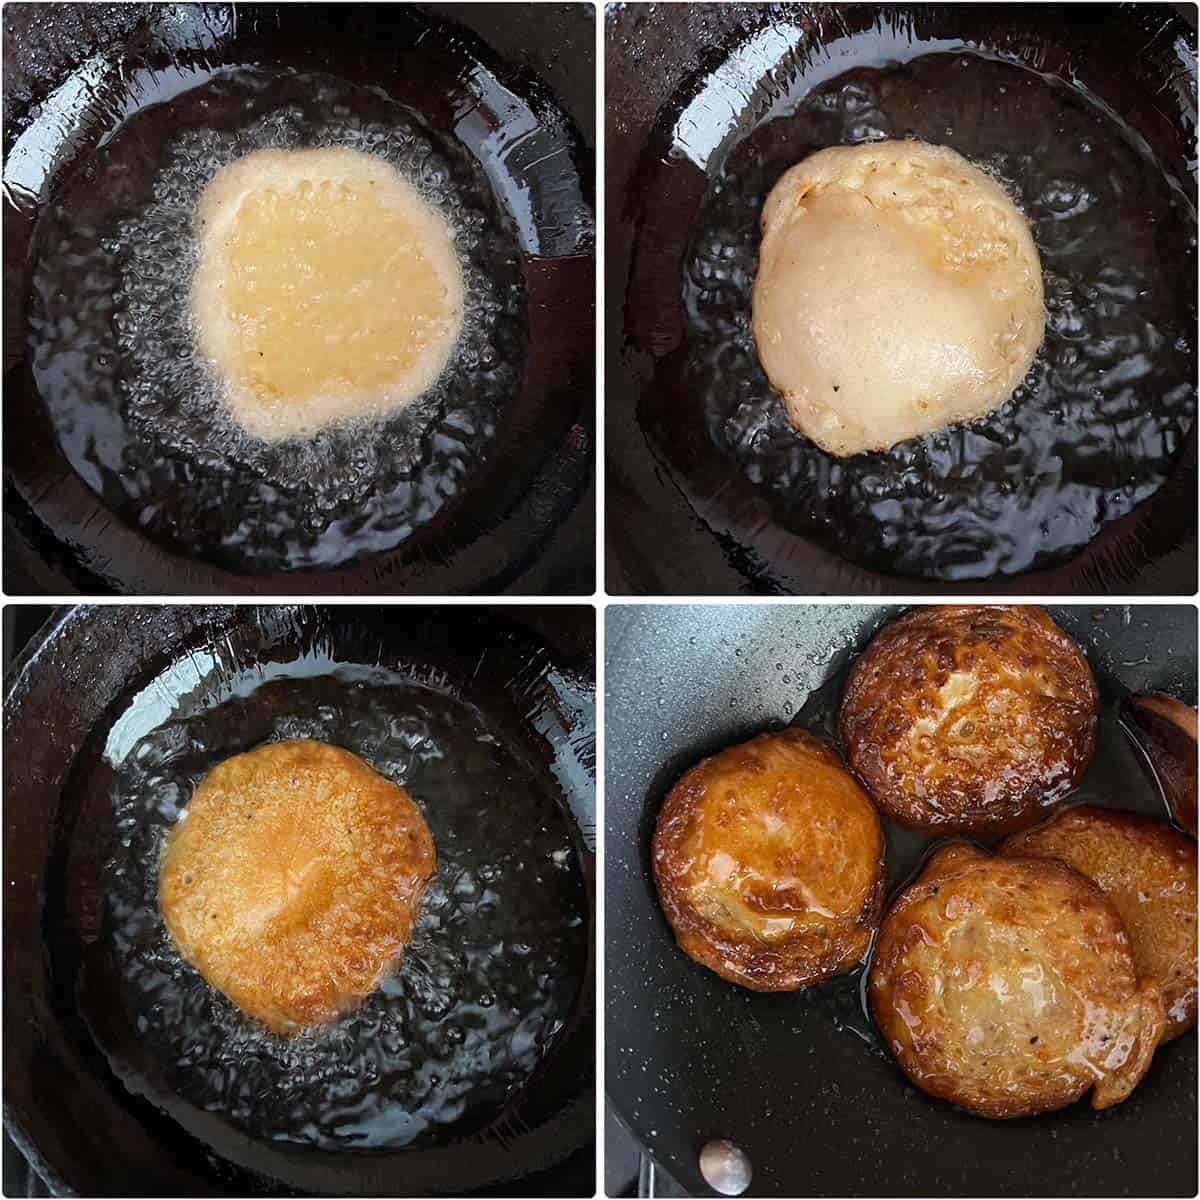 4 panel photo showing the frying of pancakes and dunking them in syrup.